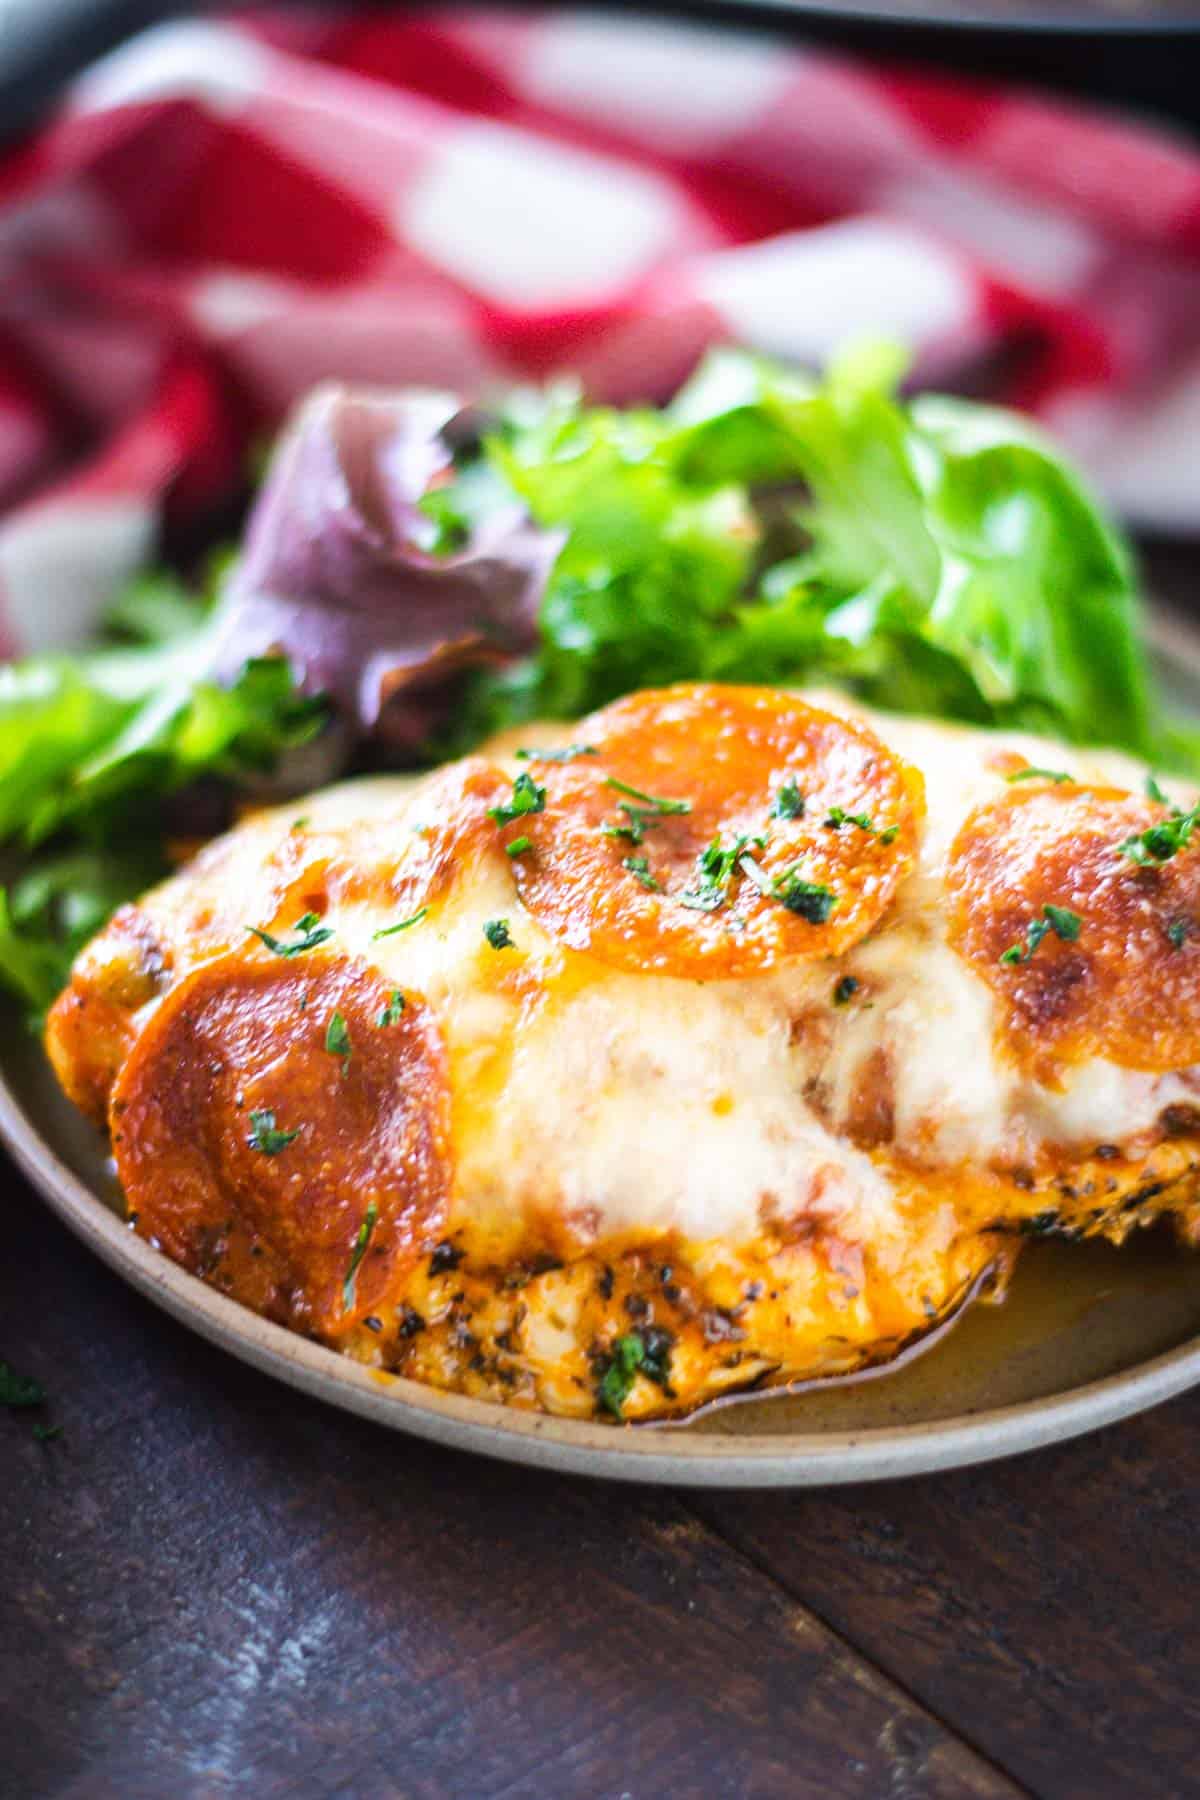 Gooey Cheesy Pizza Stuffed Chicken on a grey plate with a green salad.